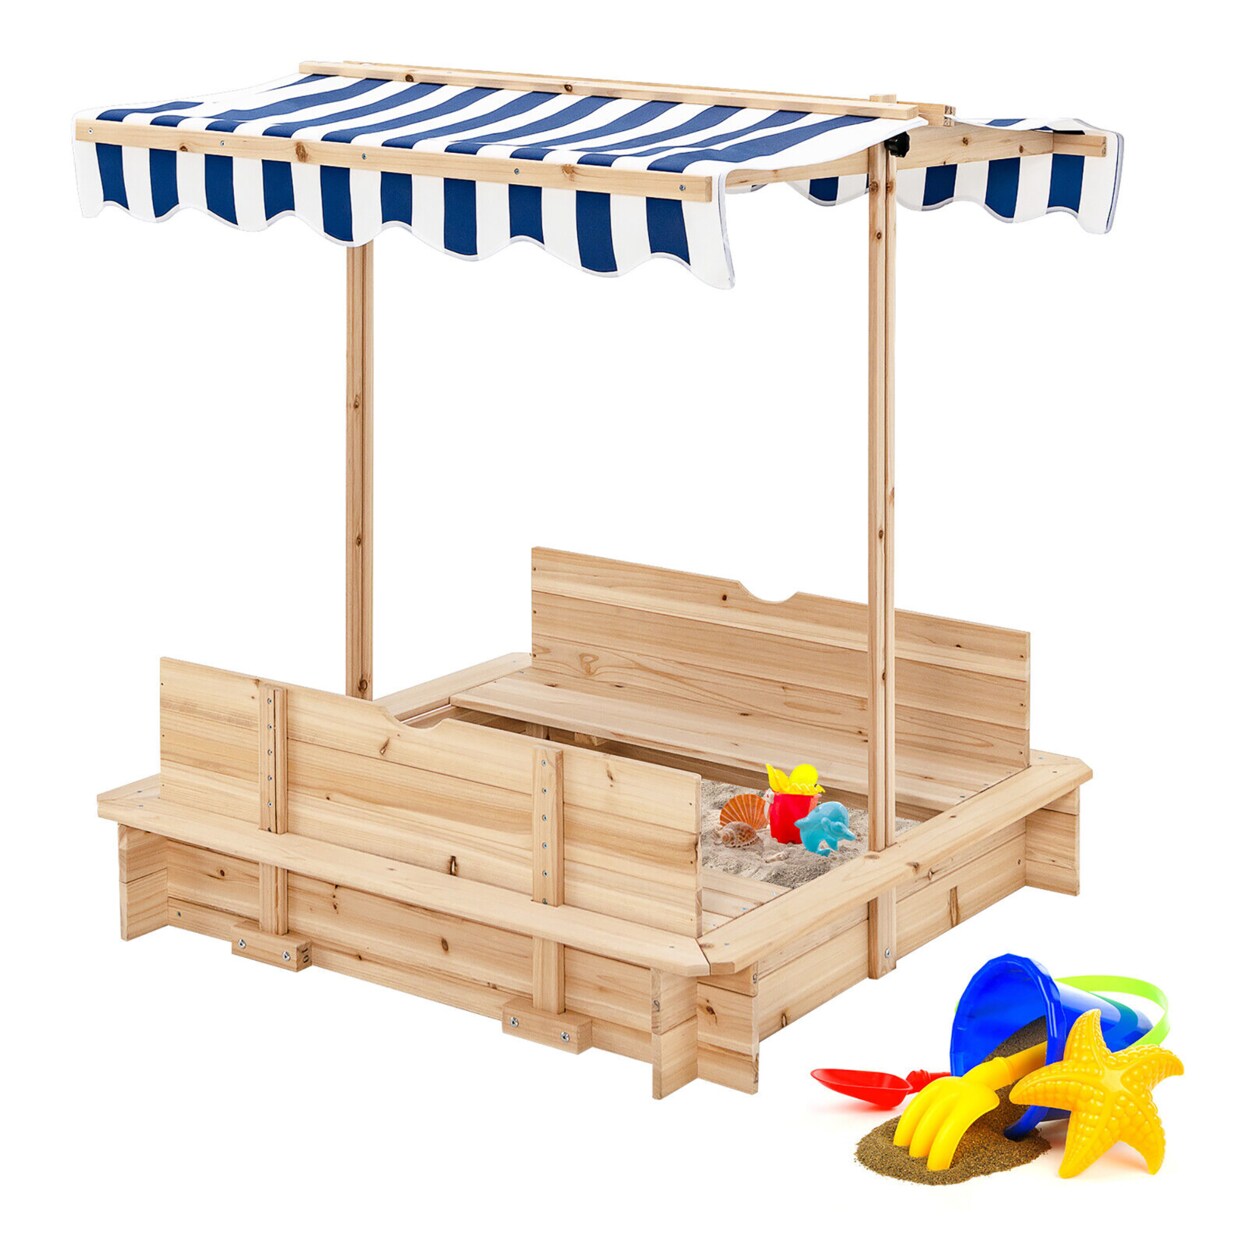 Gymax Kids Wooden Sandbox with Canopy and Foldable Bench Seats